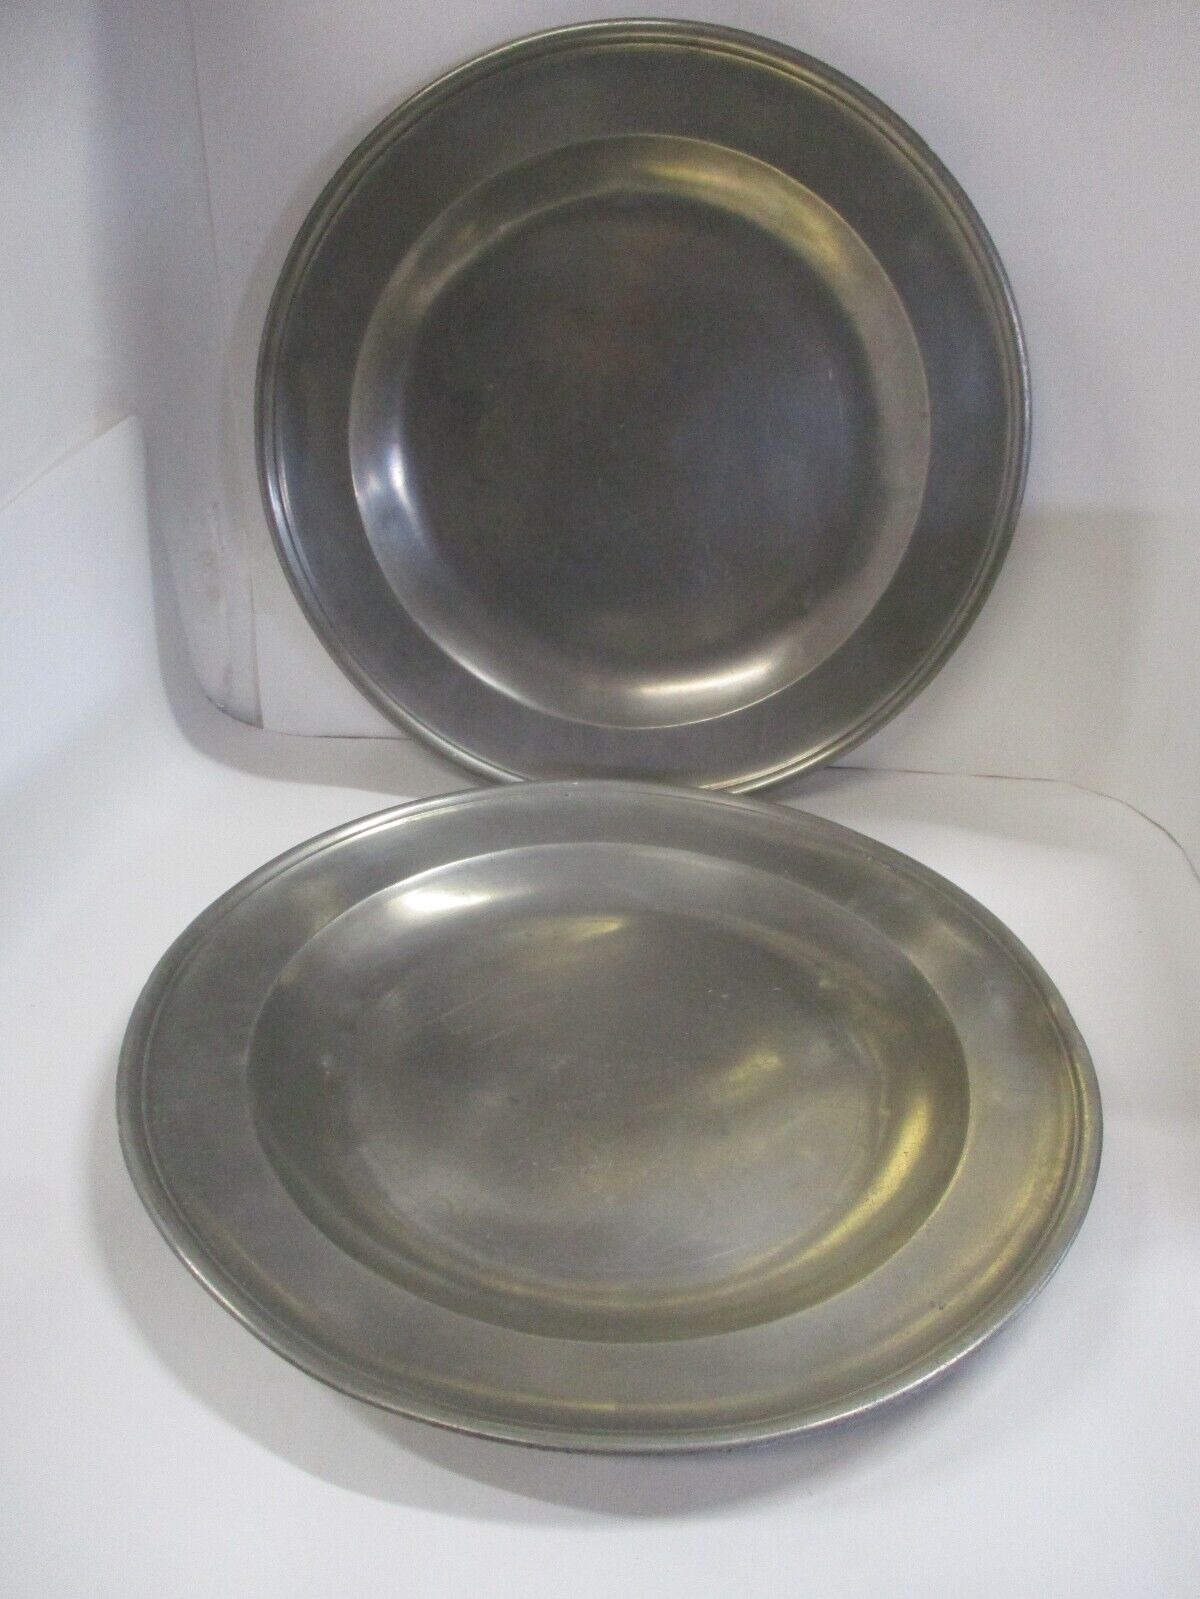 2 Circa 1820's Townsend & Compton Antique Pewter Chargers